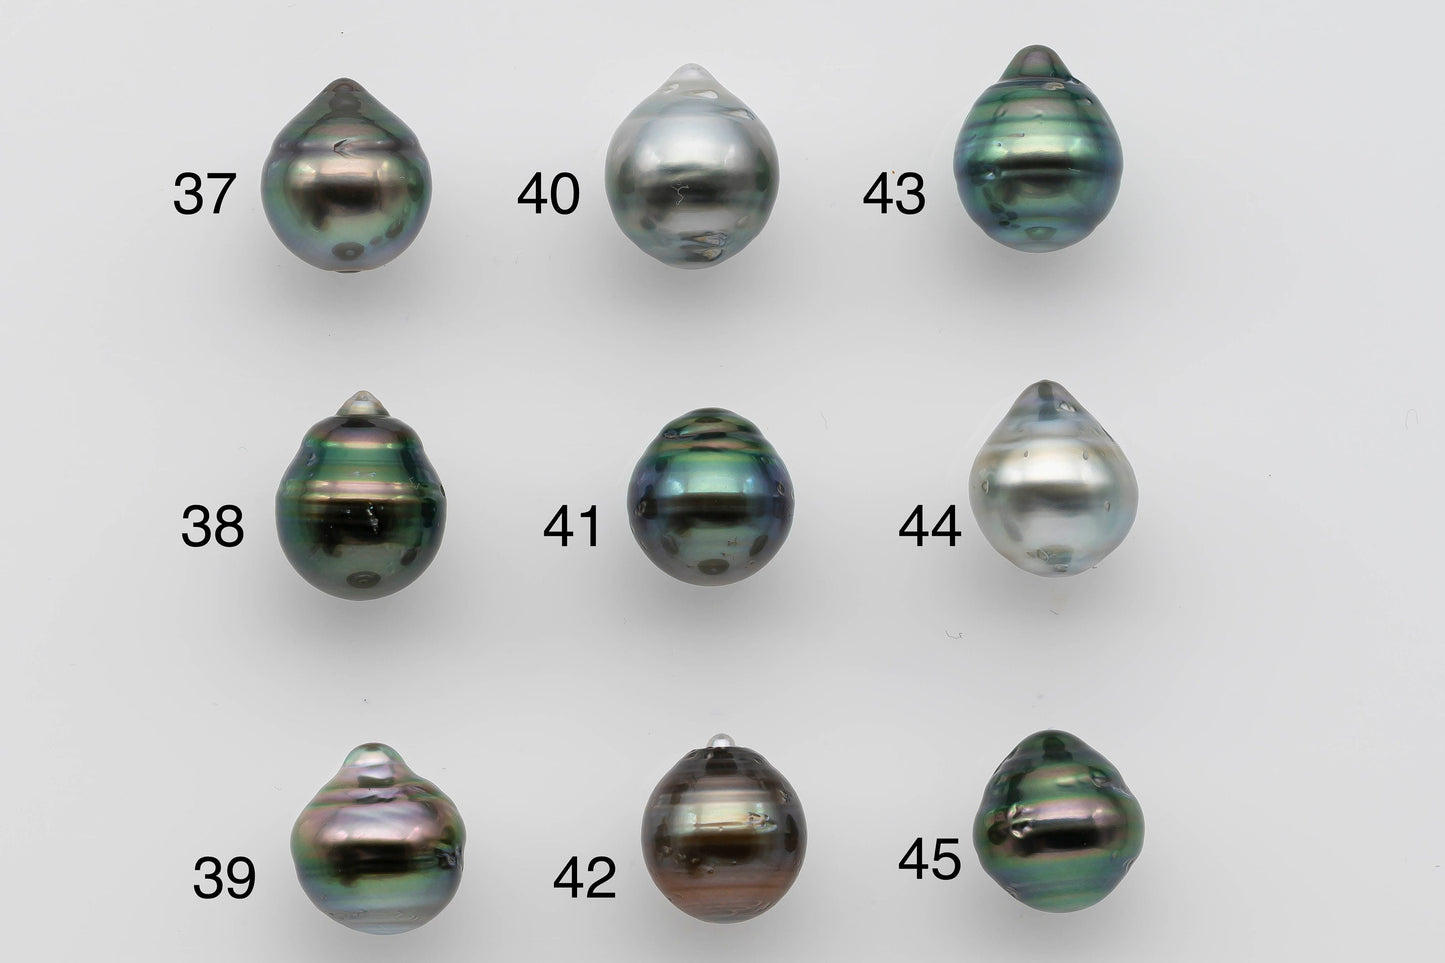 12-13mm Single Tahitian Pearl Tear Drop Natural Color with High Luster for Jewelry Making, SKU # 1276TH